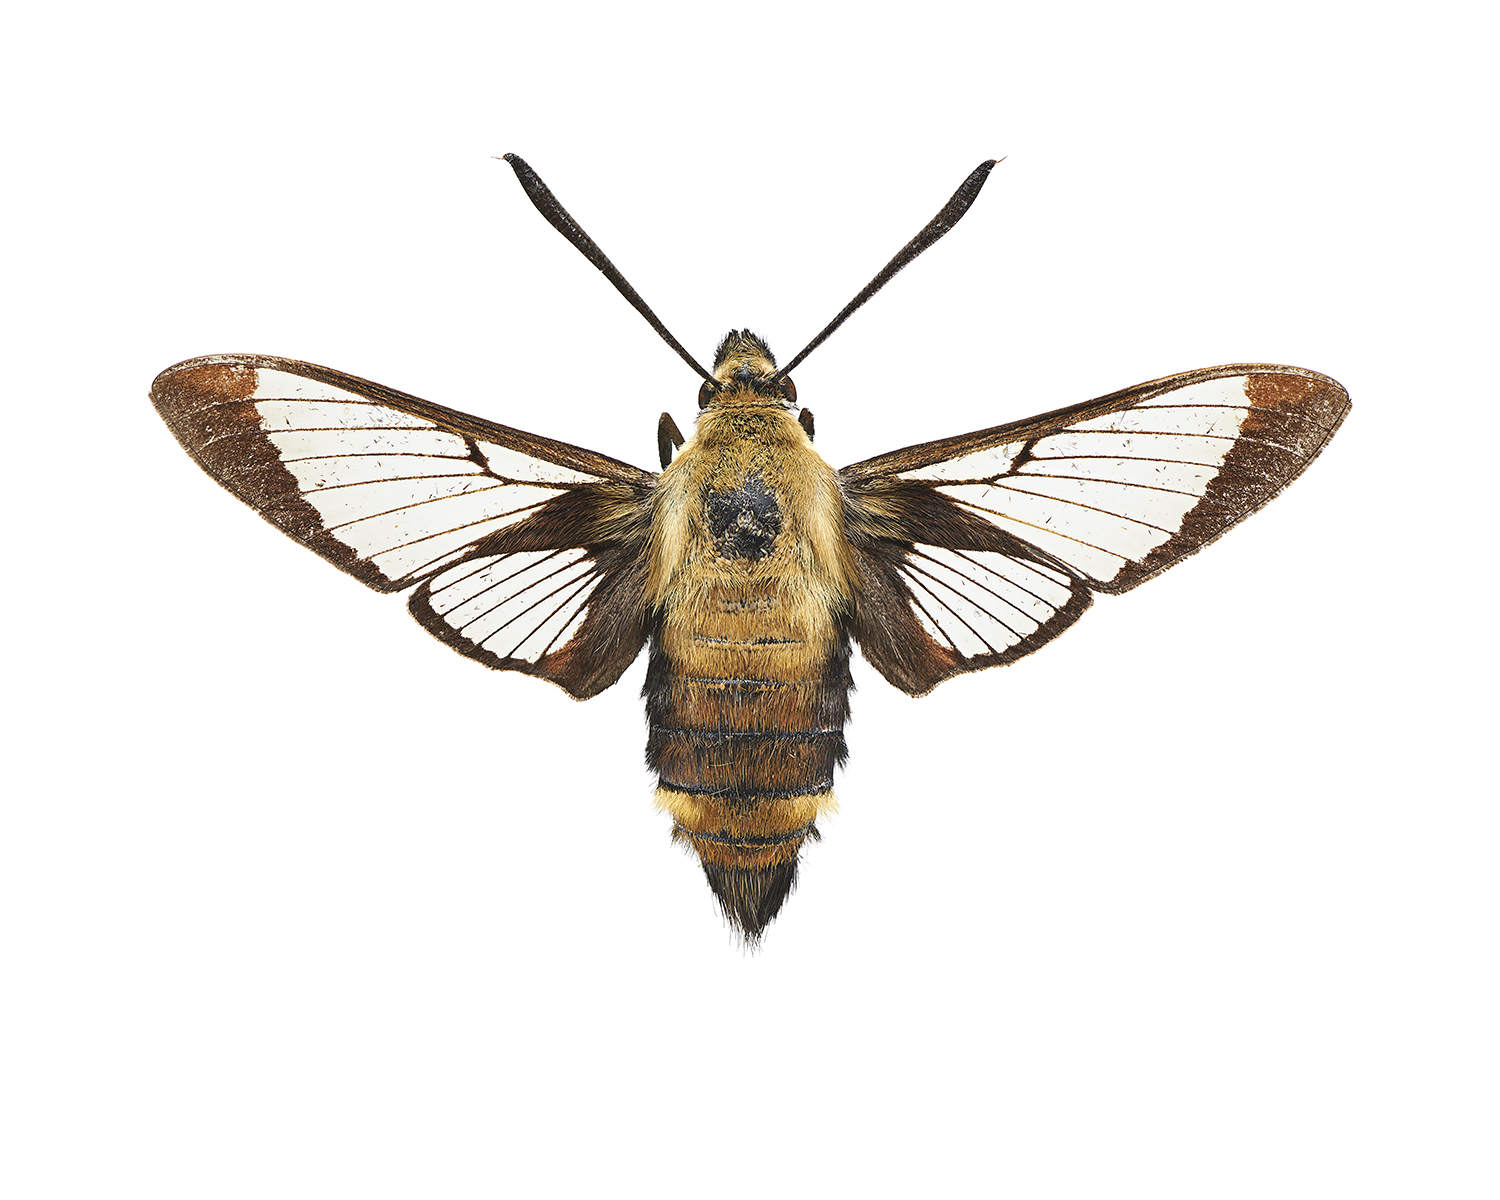 Snowberry Clearwing Moth, Hemaris diffinis